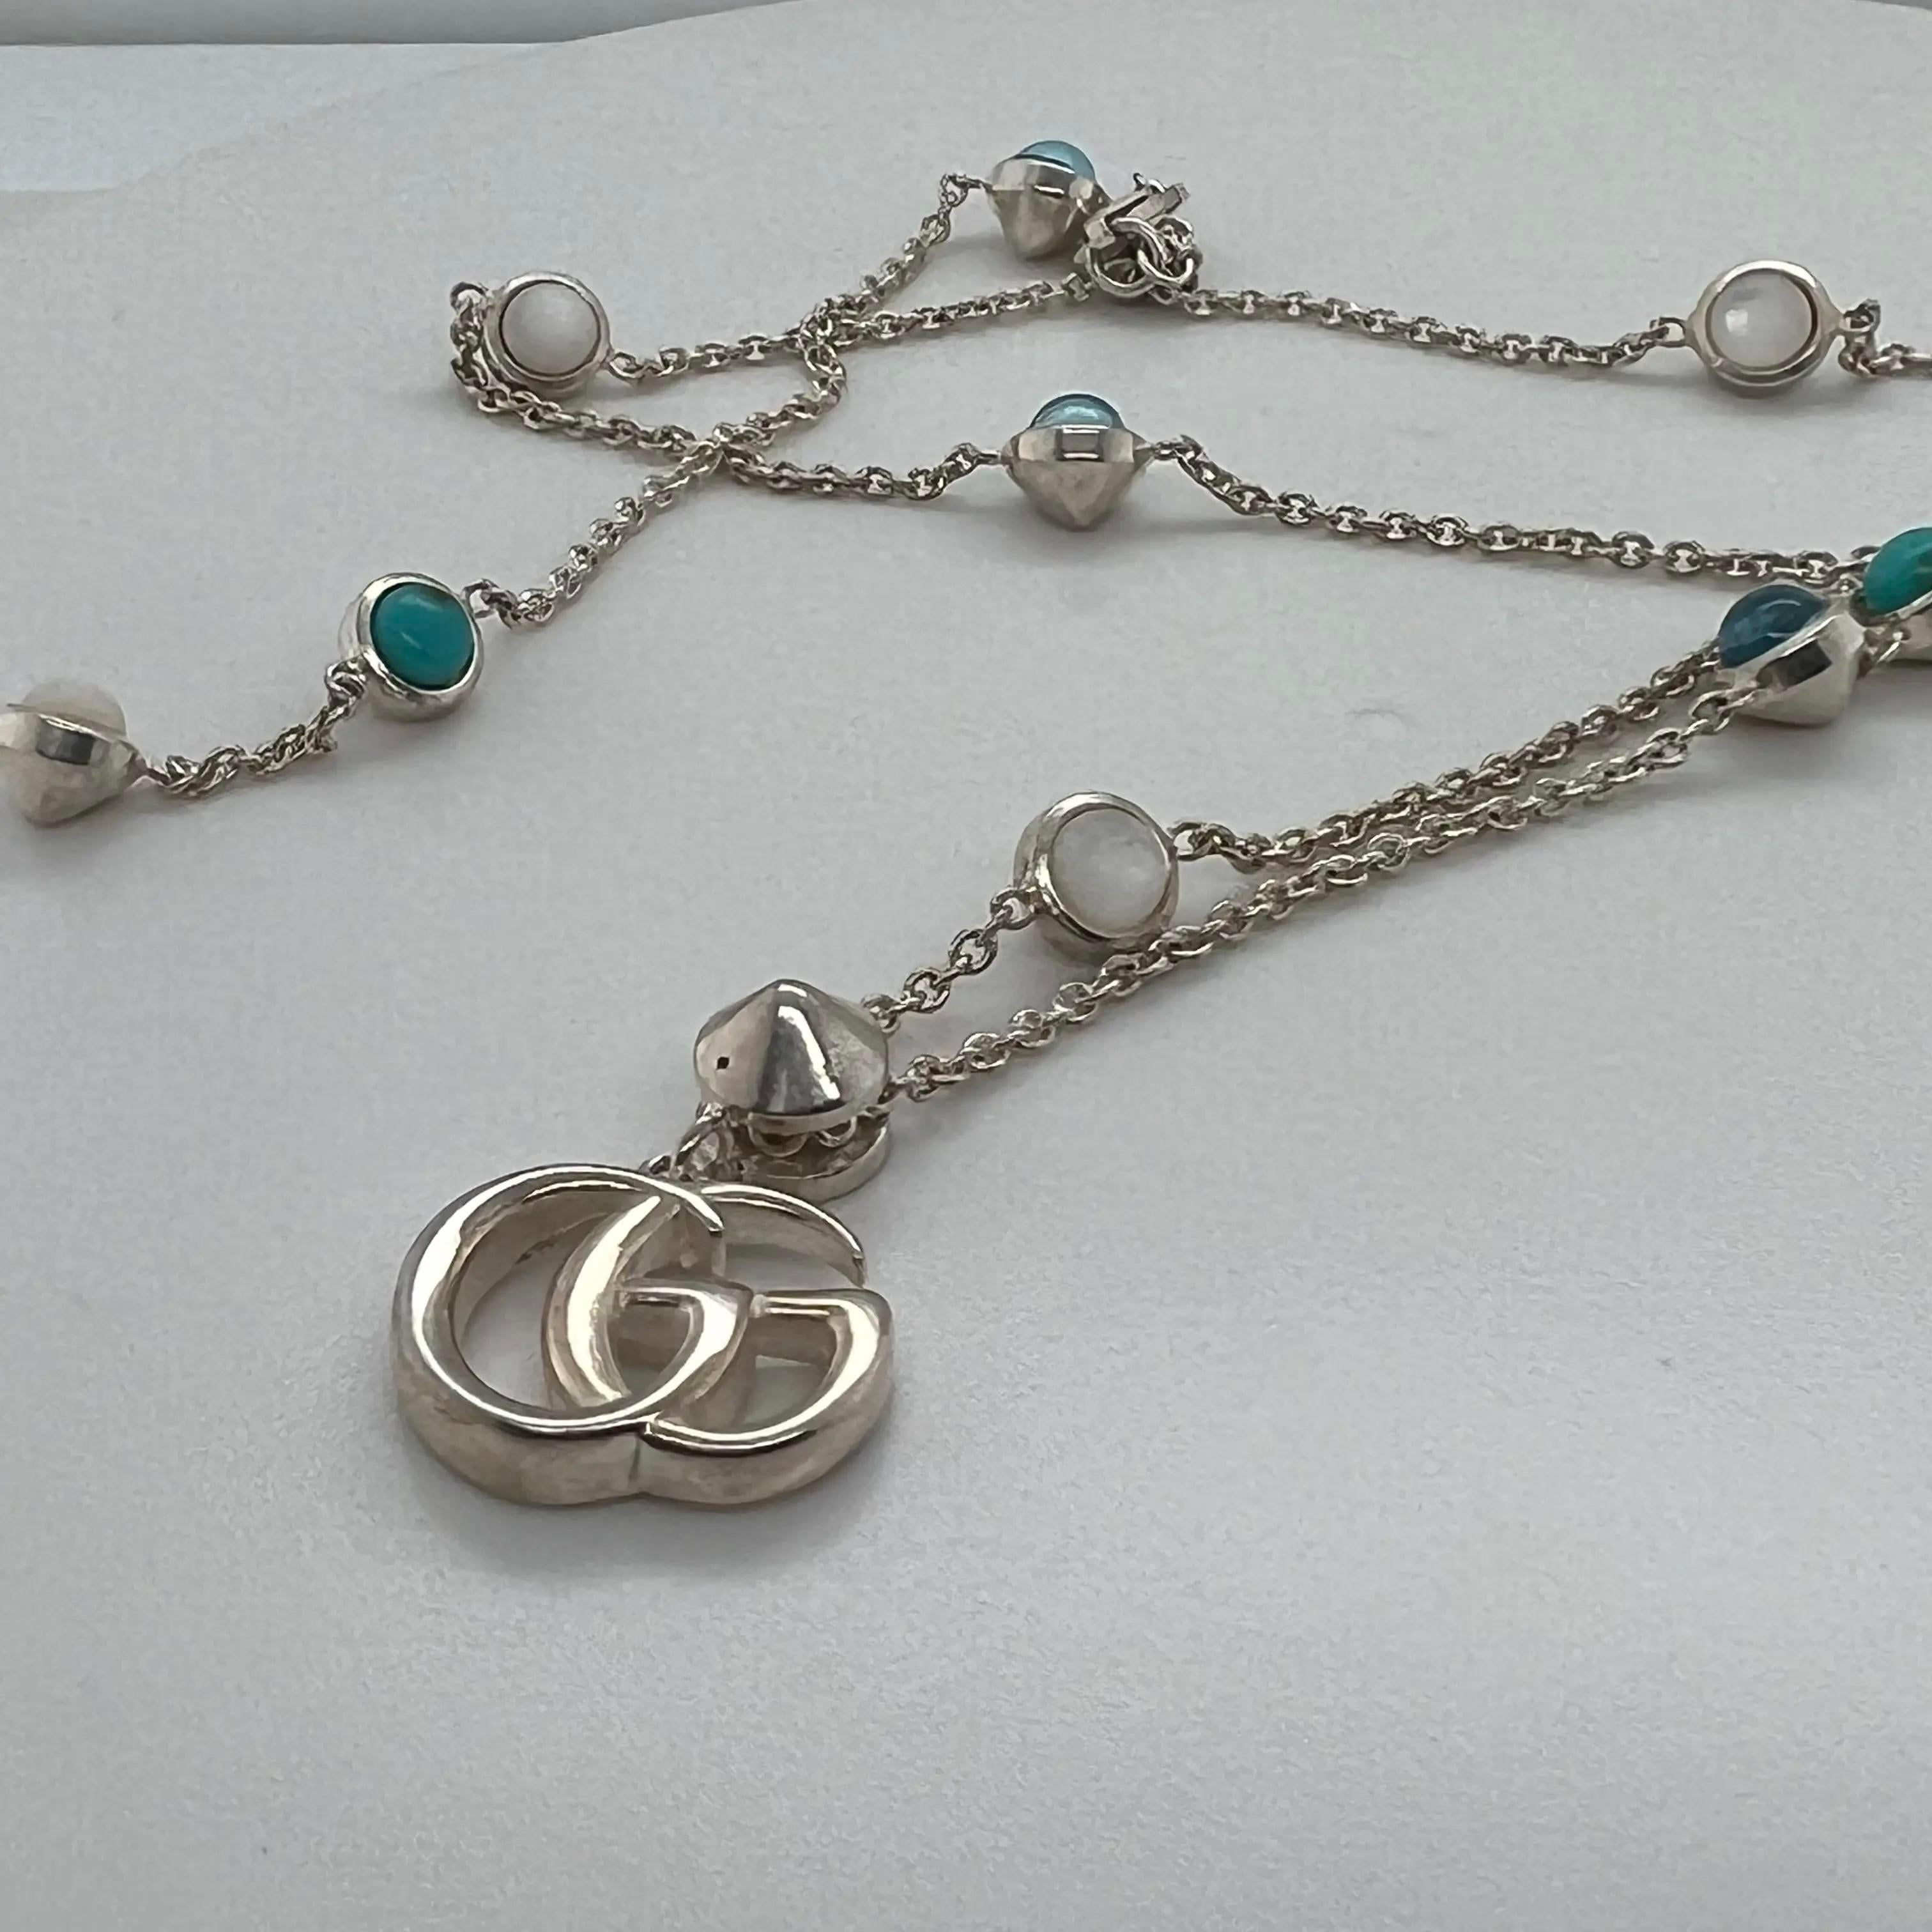 The GUCCI Double G pendant hangs from a 925 sterling silver necklace, enriched with mother of pearl, turquoise colored resin, and topaz stones. Necklace length: 17 inches. Pendant size: 14.4mm x 11.5mm. Secured with a lobster lock. Made in Italy.